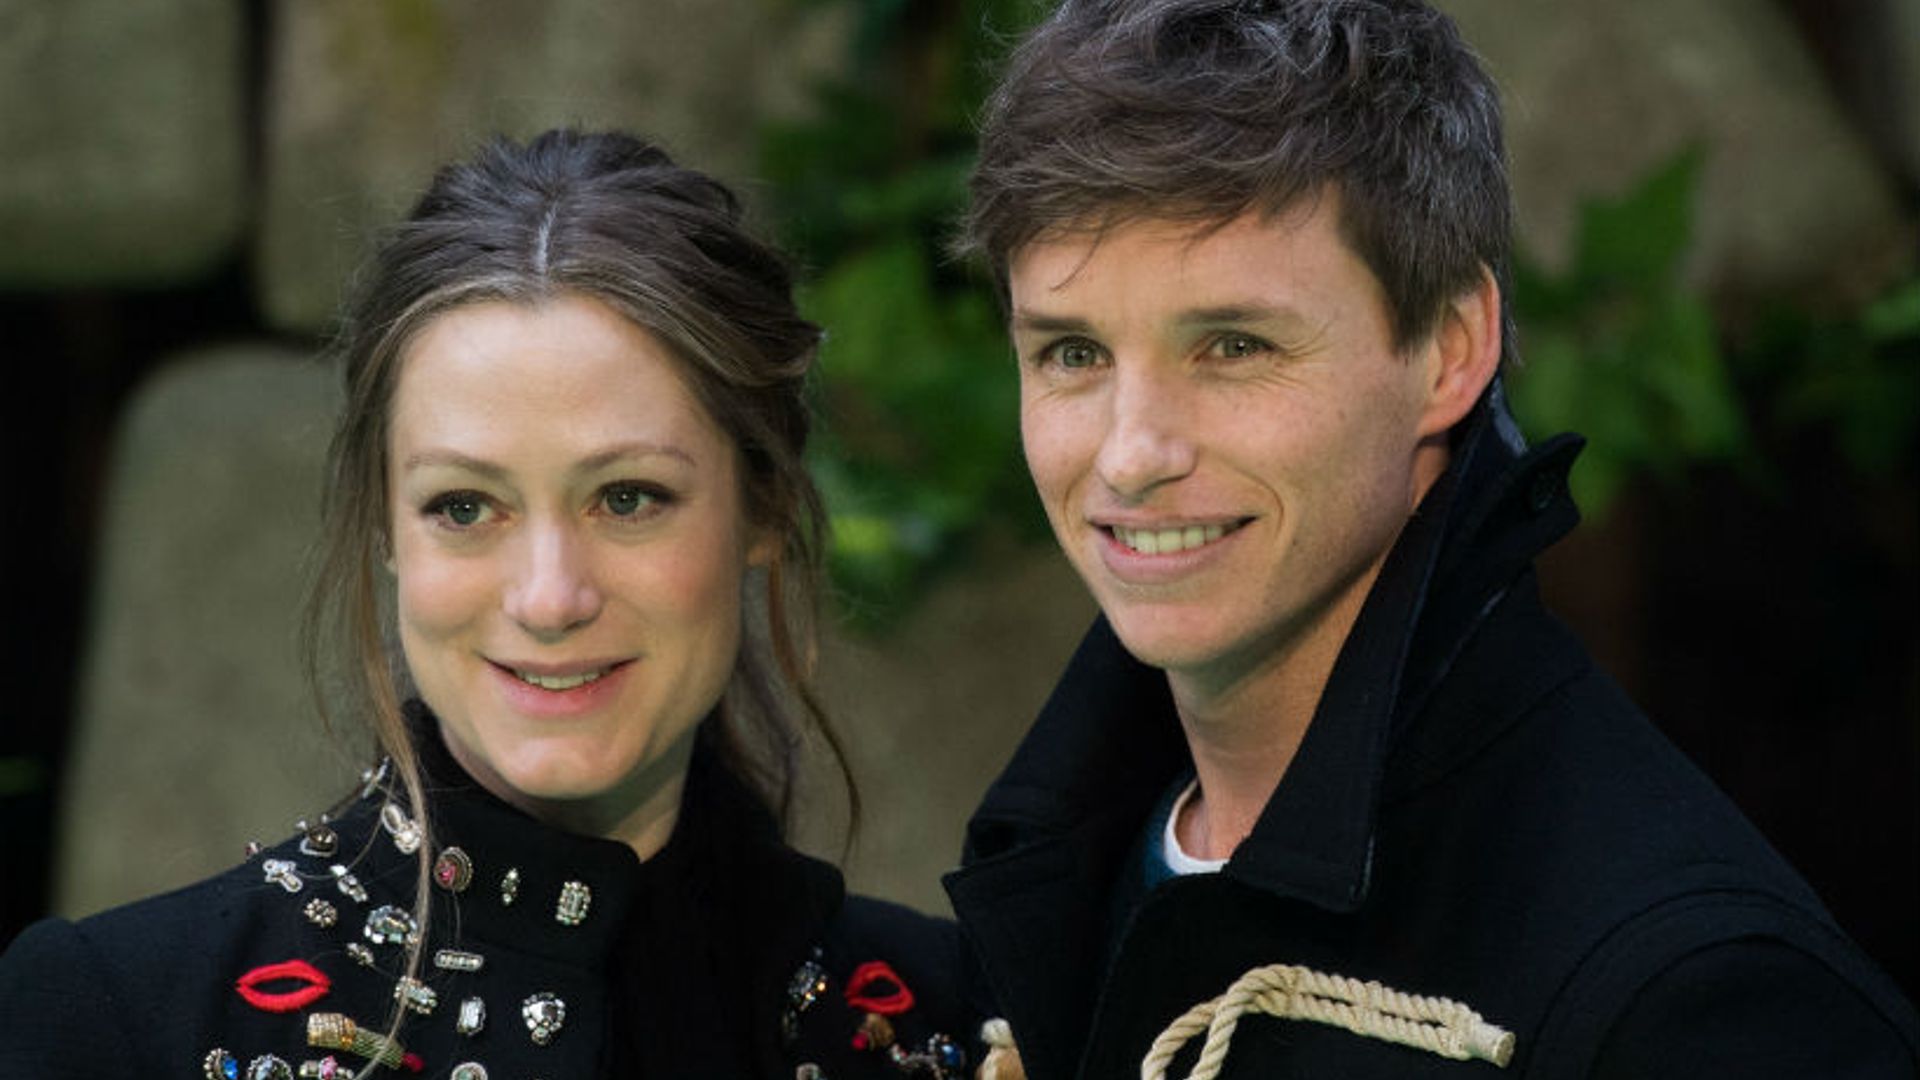 Eddie Redmayne and Hannah Bagshawe welcome second baby – see the sweet announcement